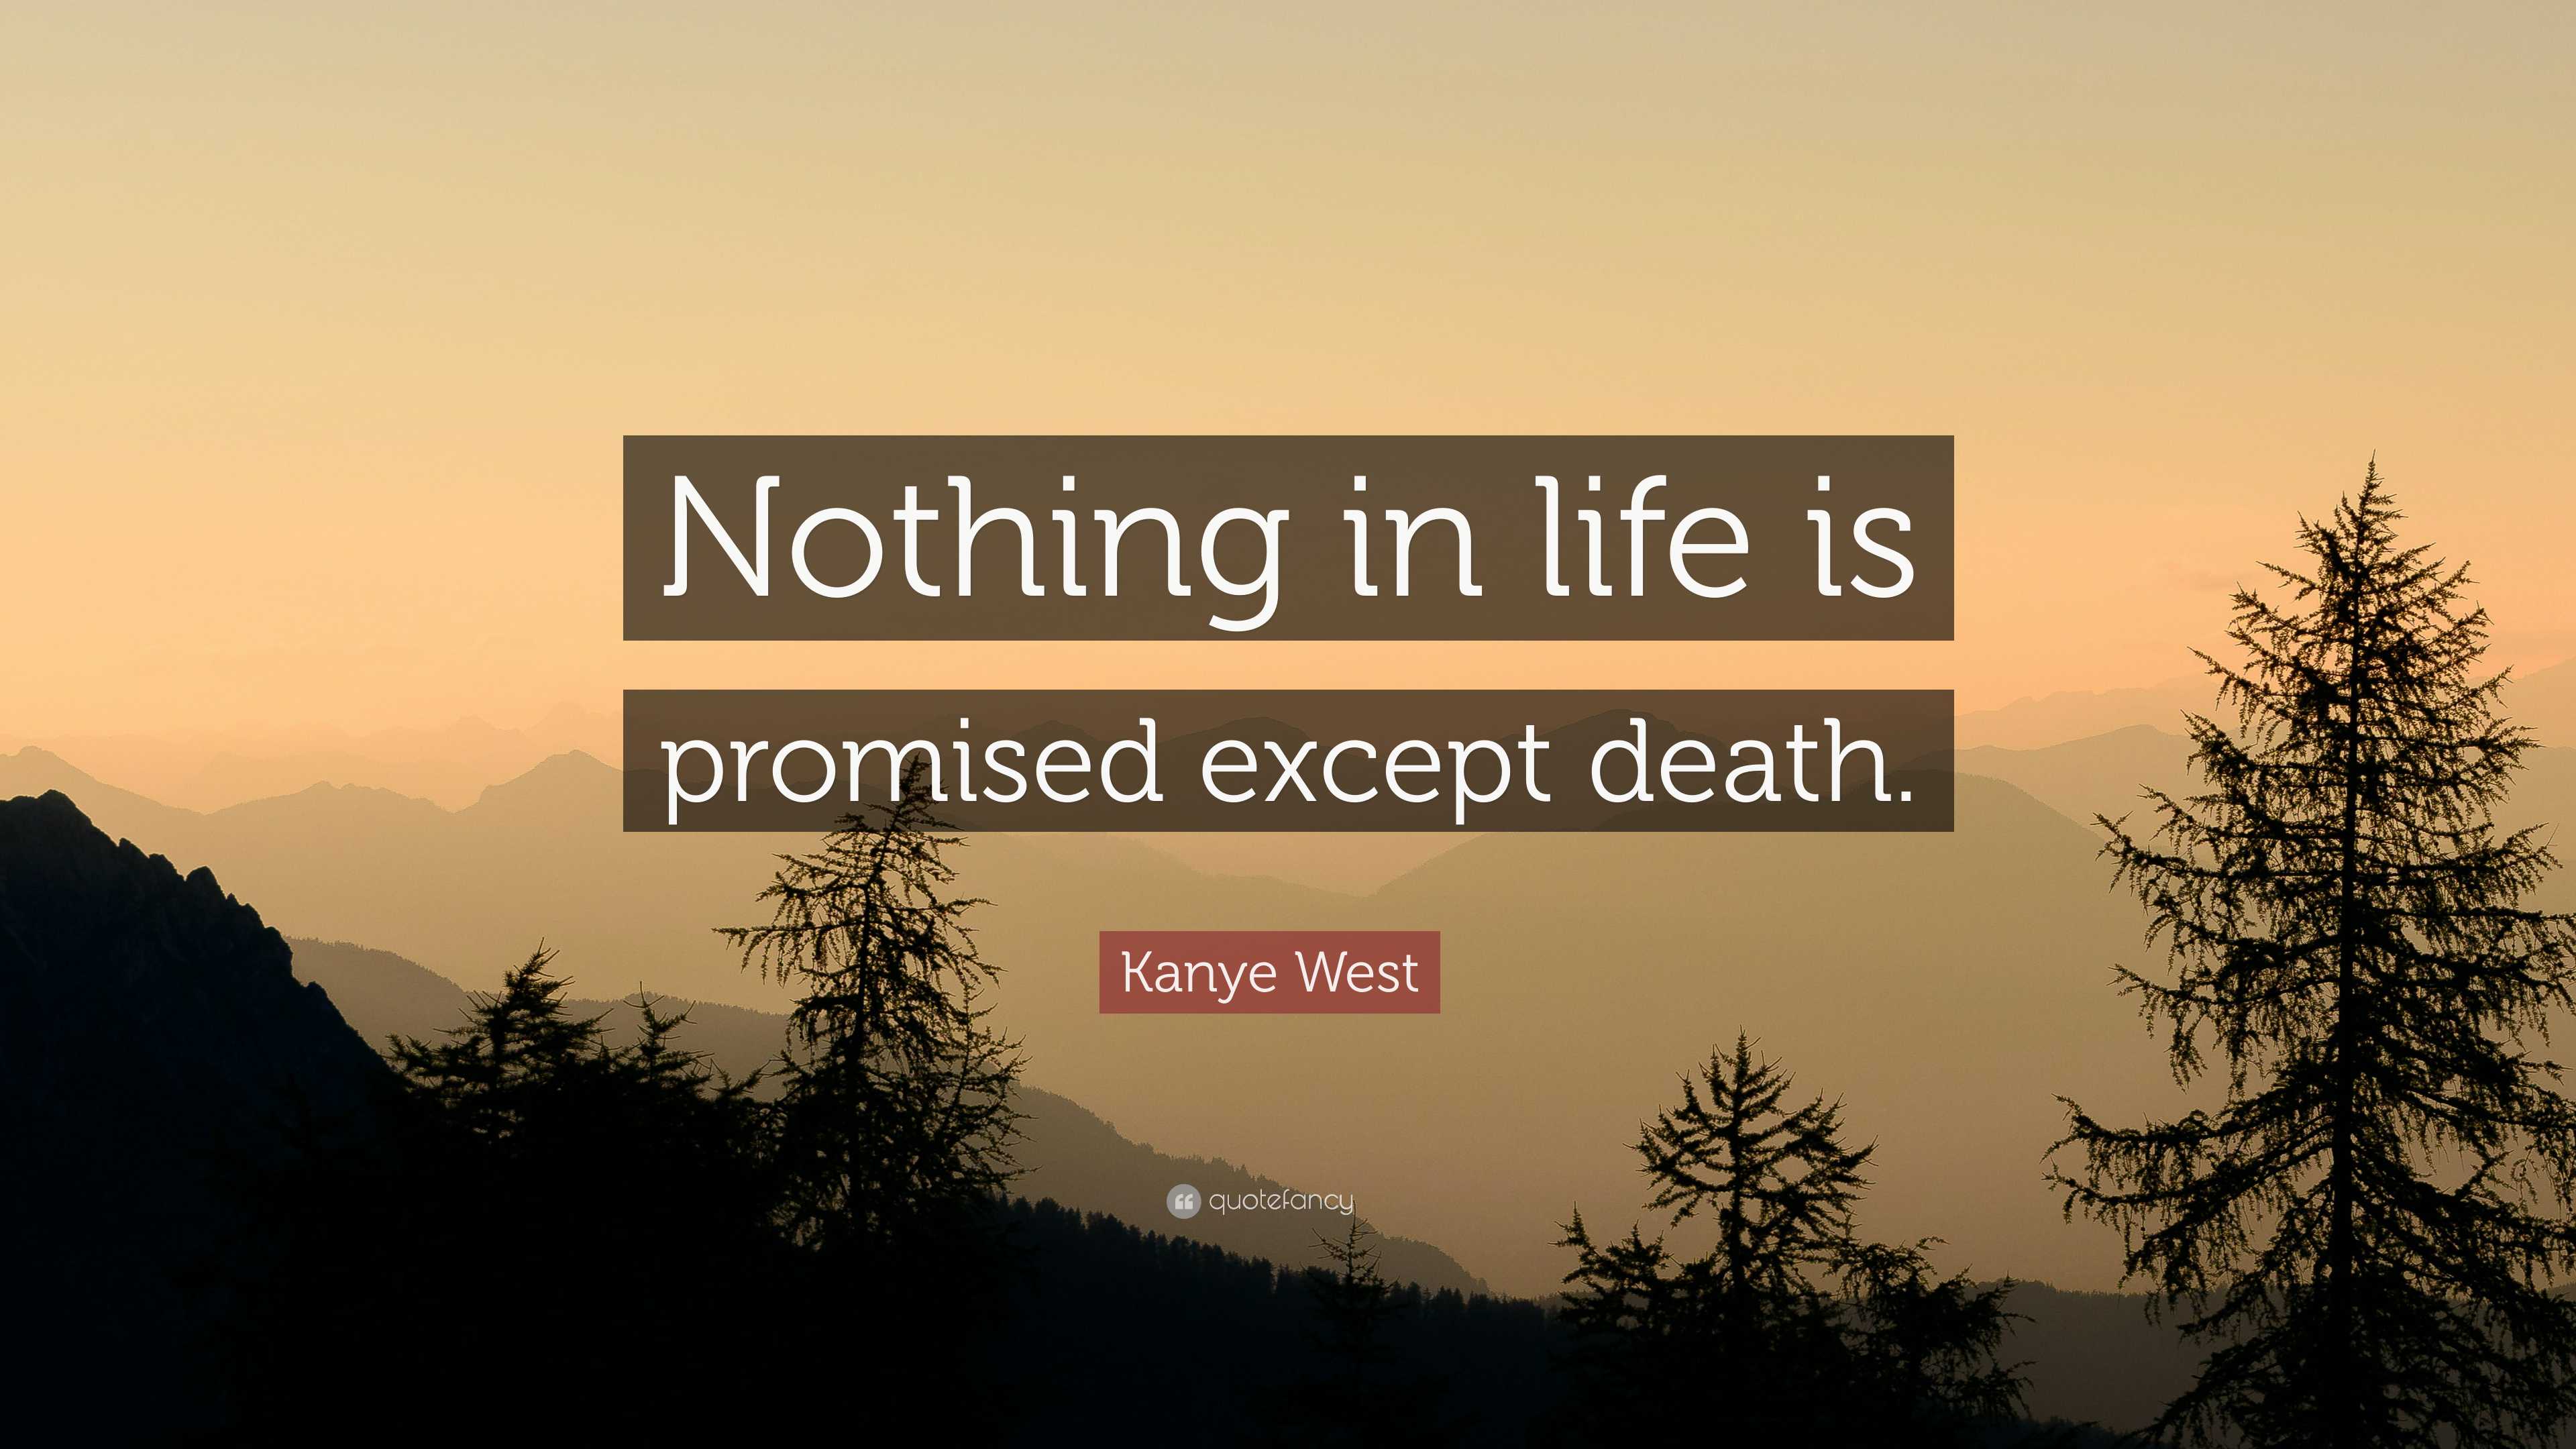 Kanye West quote: Nothing in life is promised except death.